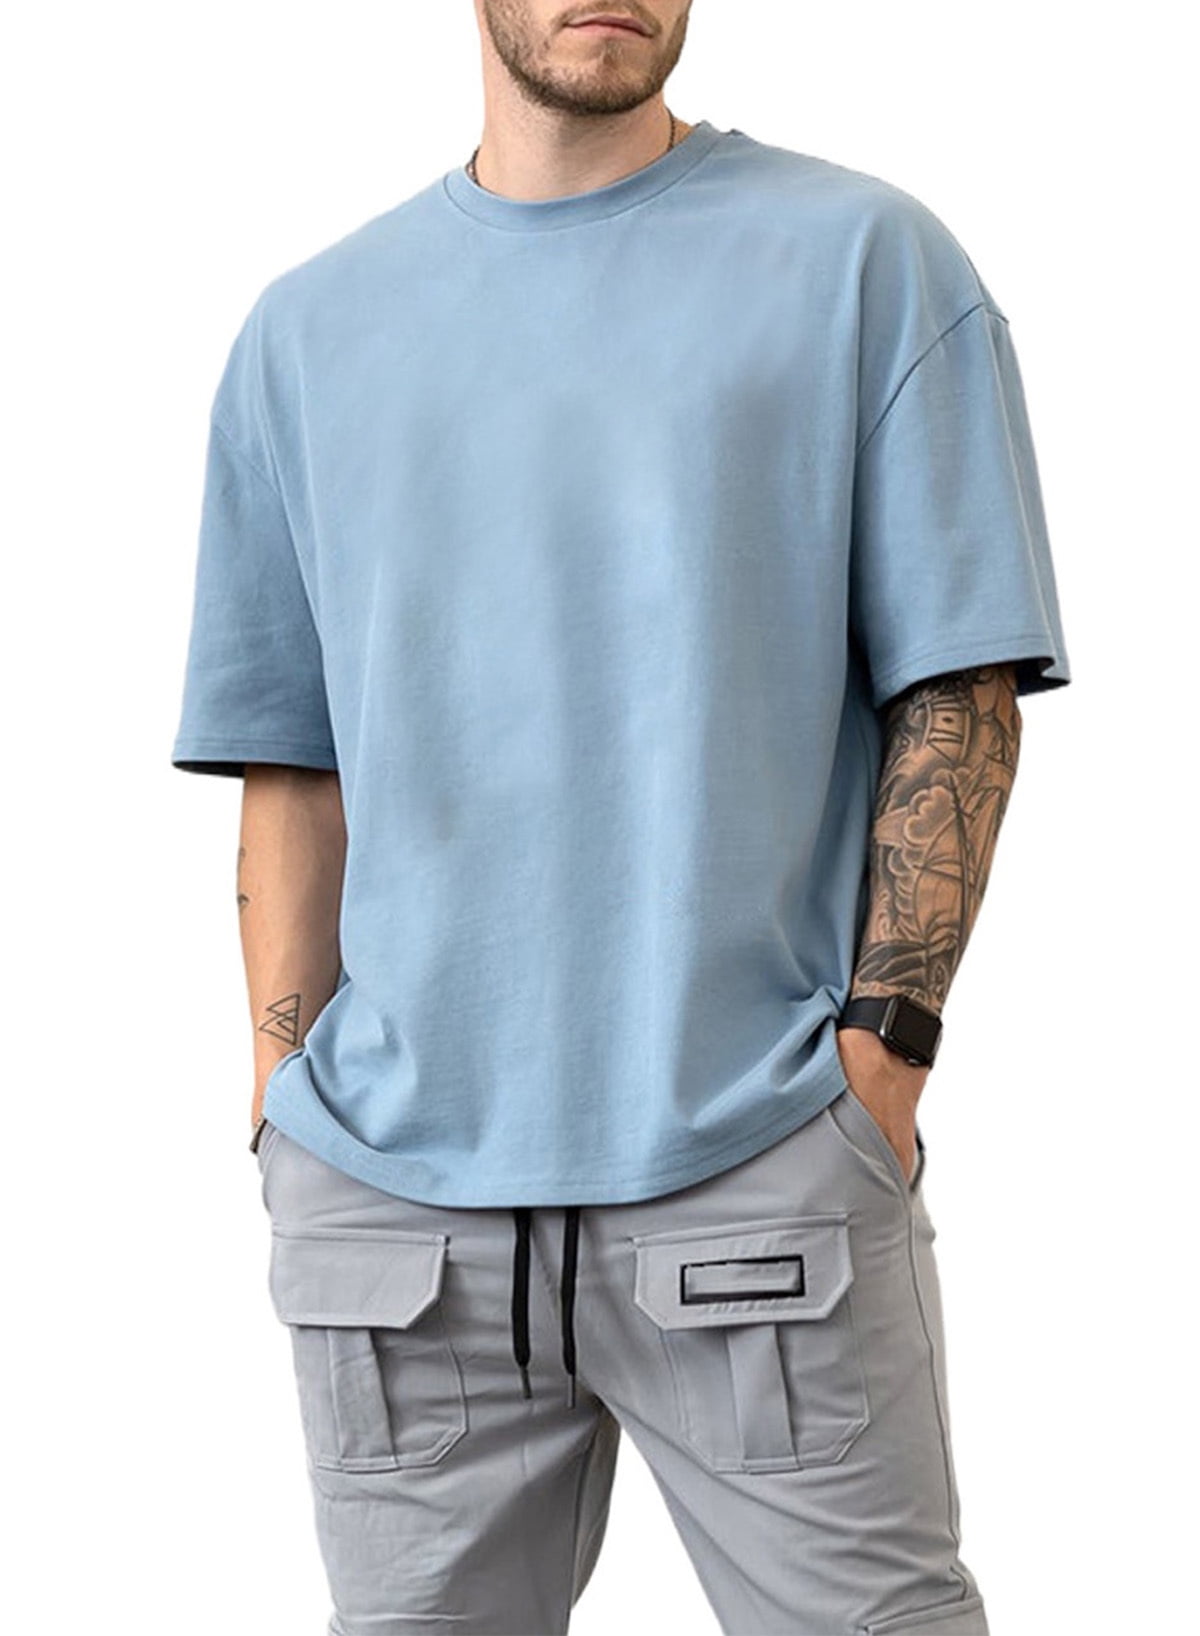 Sidefeel Men Oversized Dropped Shoulder Tee Fashion Solid Color Crew Neck  Half Sleeve T-Shirt Tops S-2XL